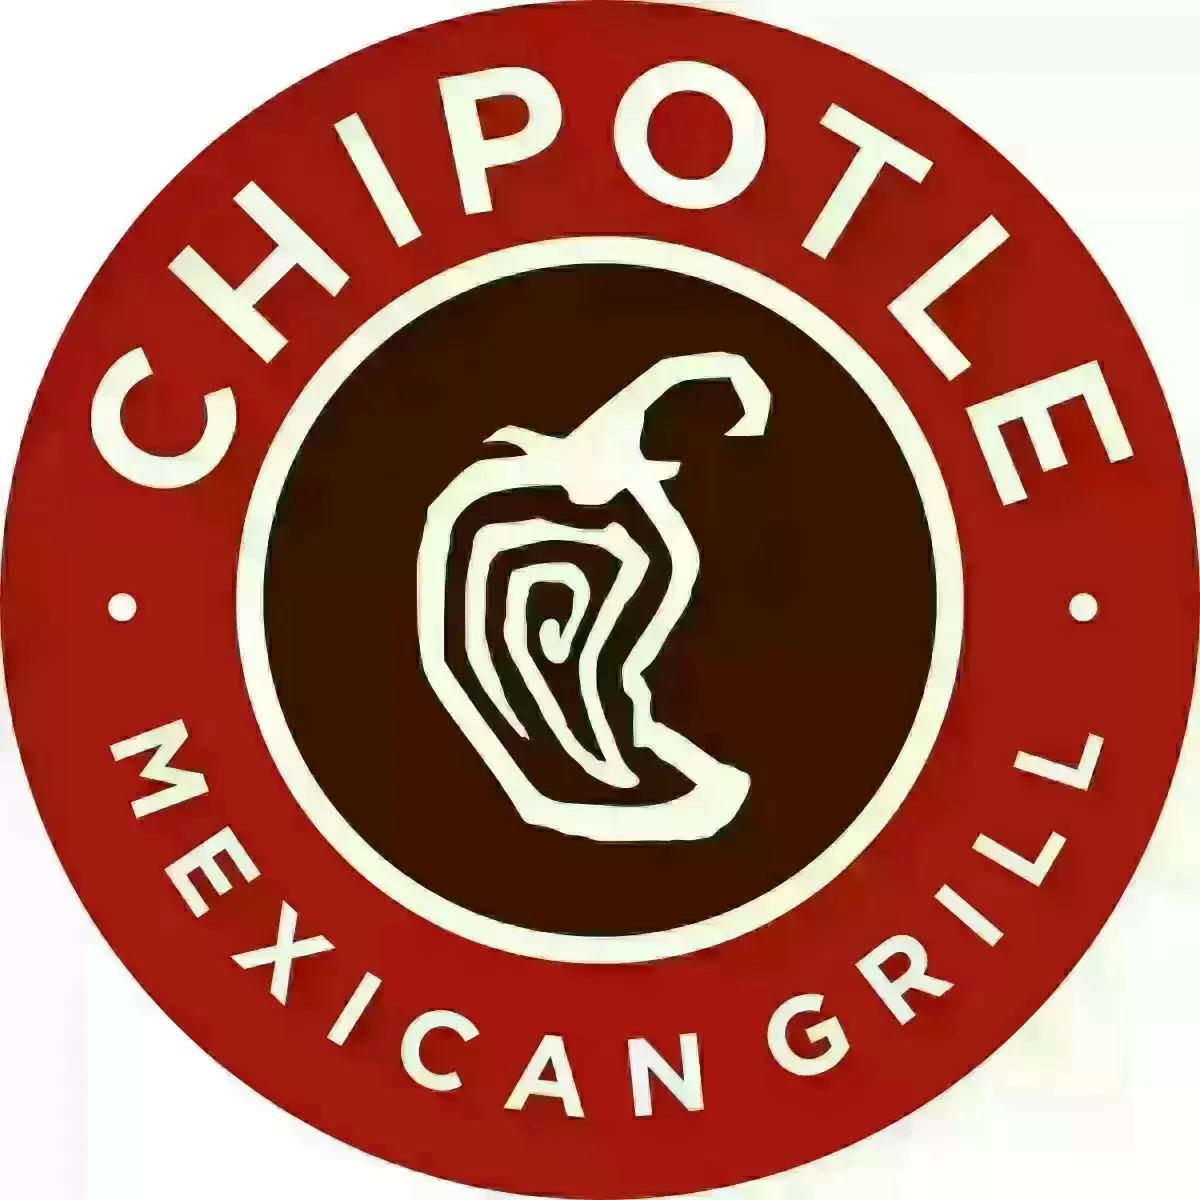 Free Chipotle Entree with a $40 Chipotle Gift Card Purchase